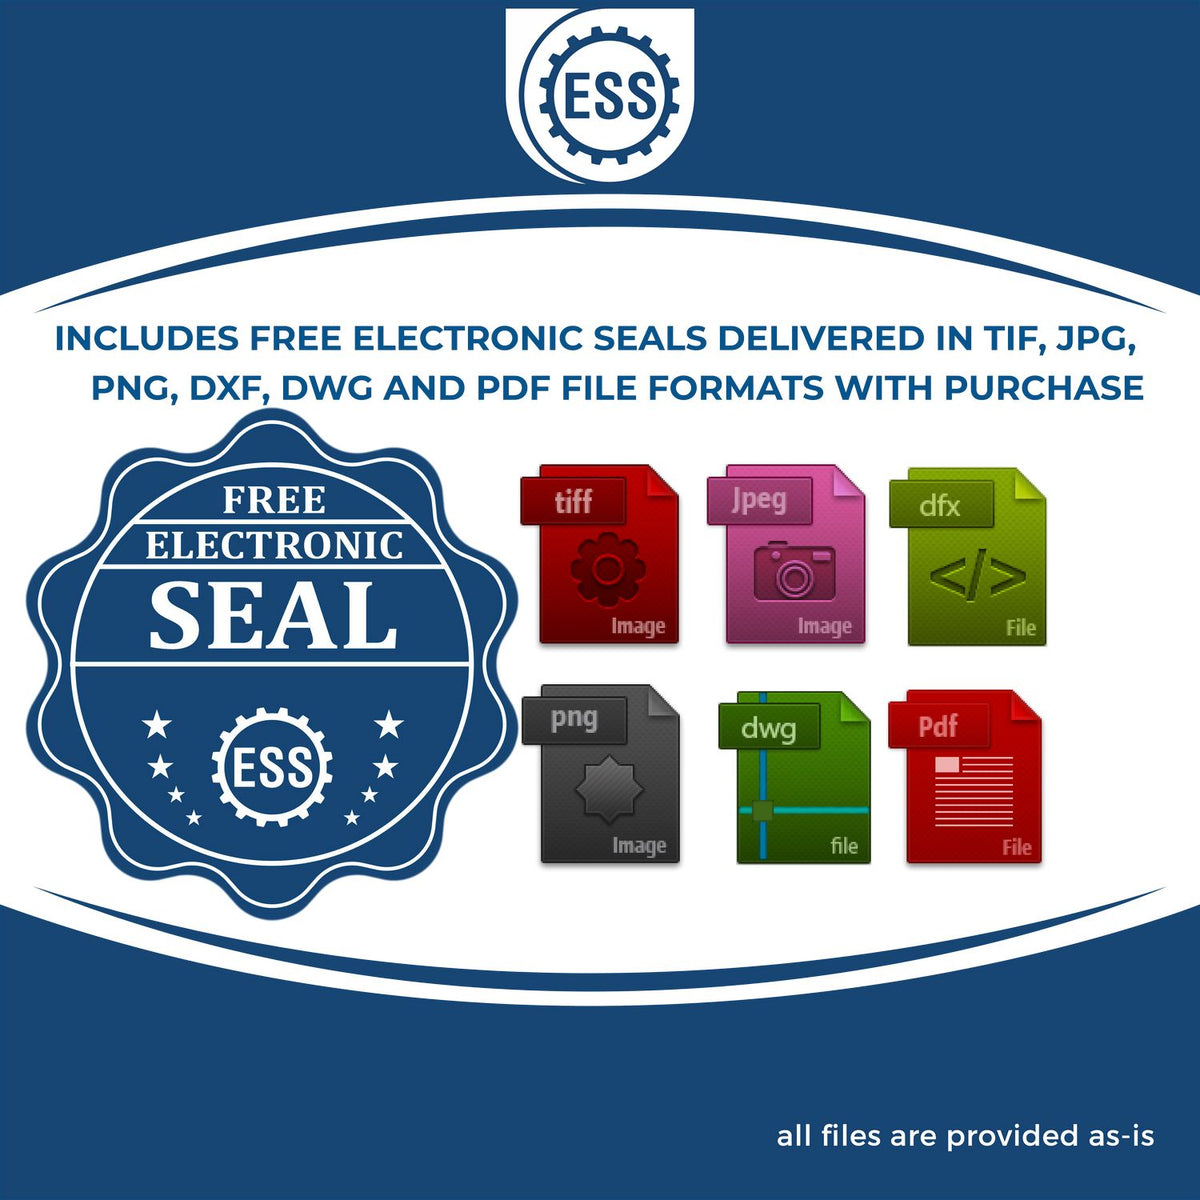 An infographic for the free electronic seal for the Wyoming Engineer Desk Seal illustrating the different file type icons such as DXF, DWG, TIF, JPG and PNG.